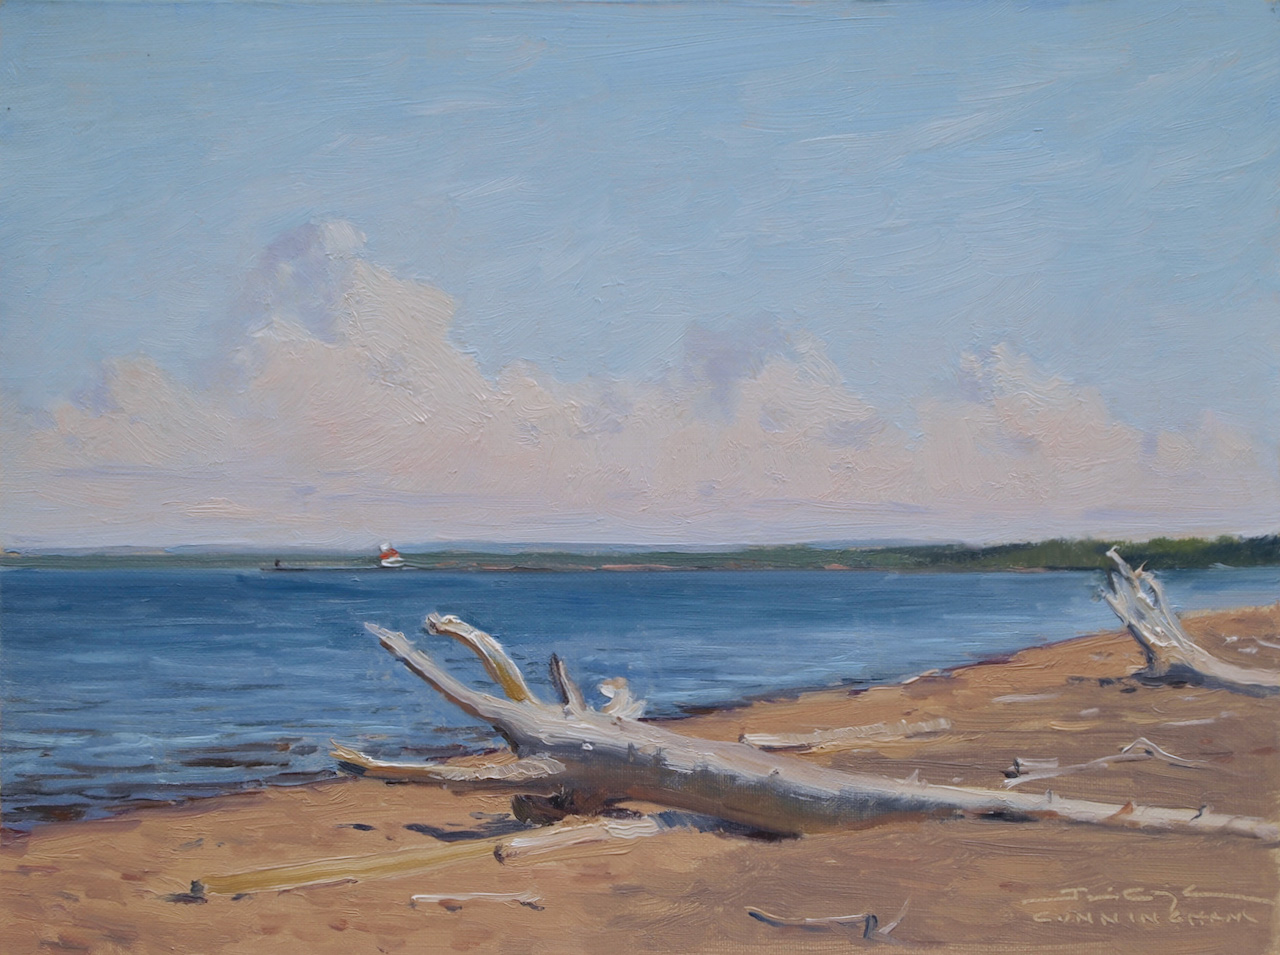 Canvas of a seashore and some dry trees on the beach